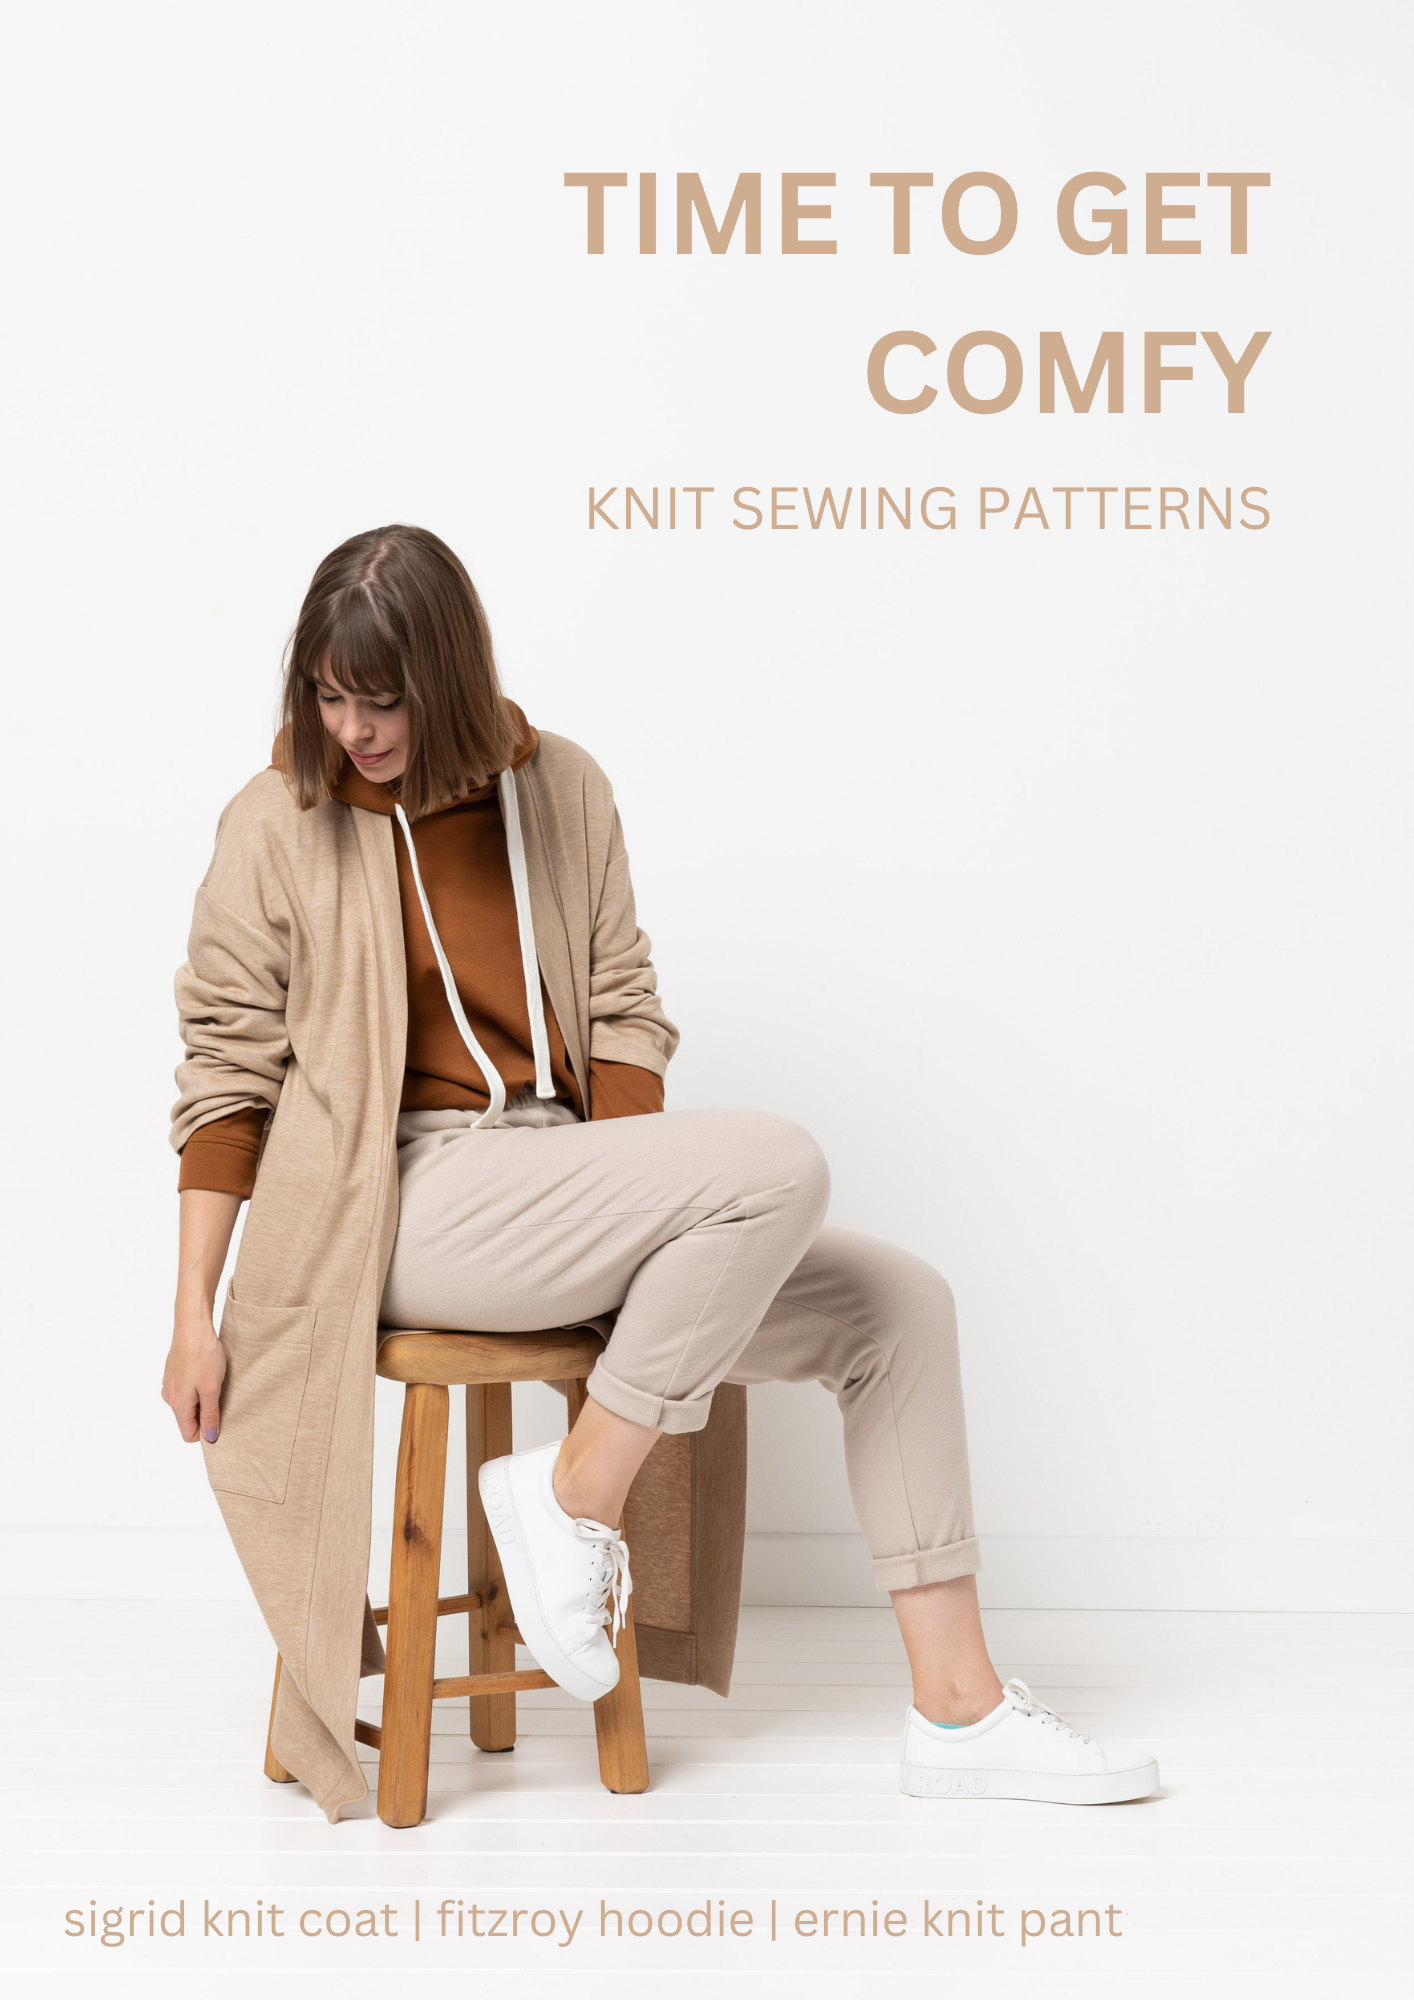 Time to get comfy | Knit Sewing Patterns